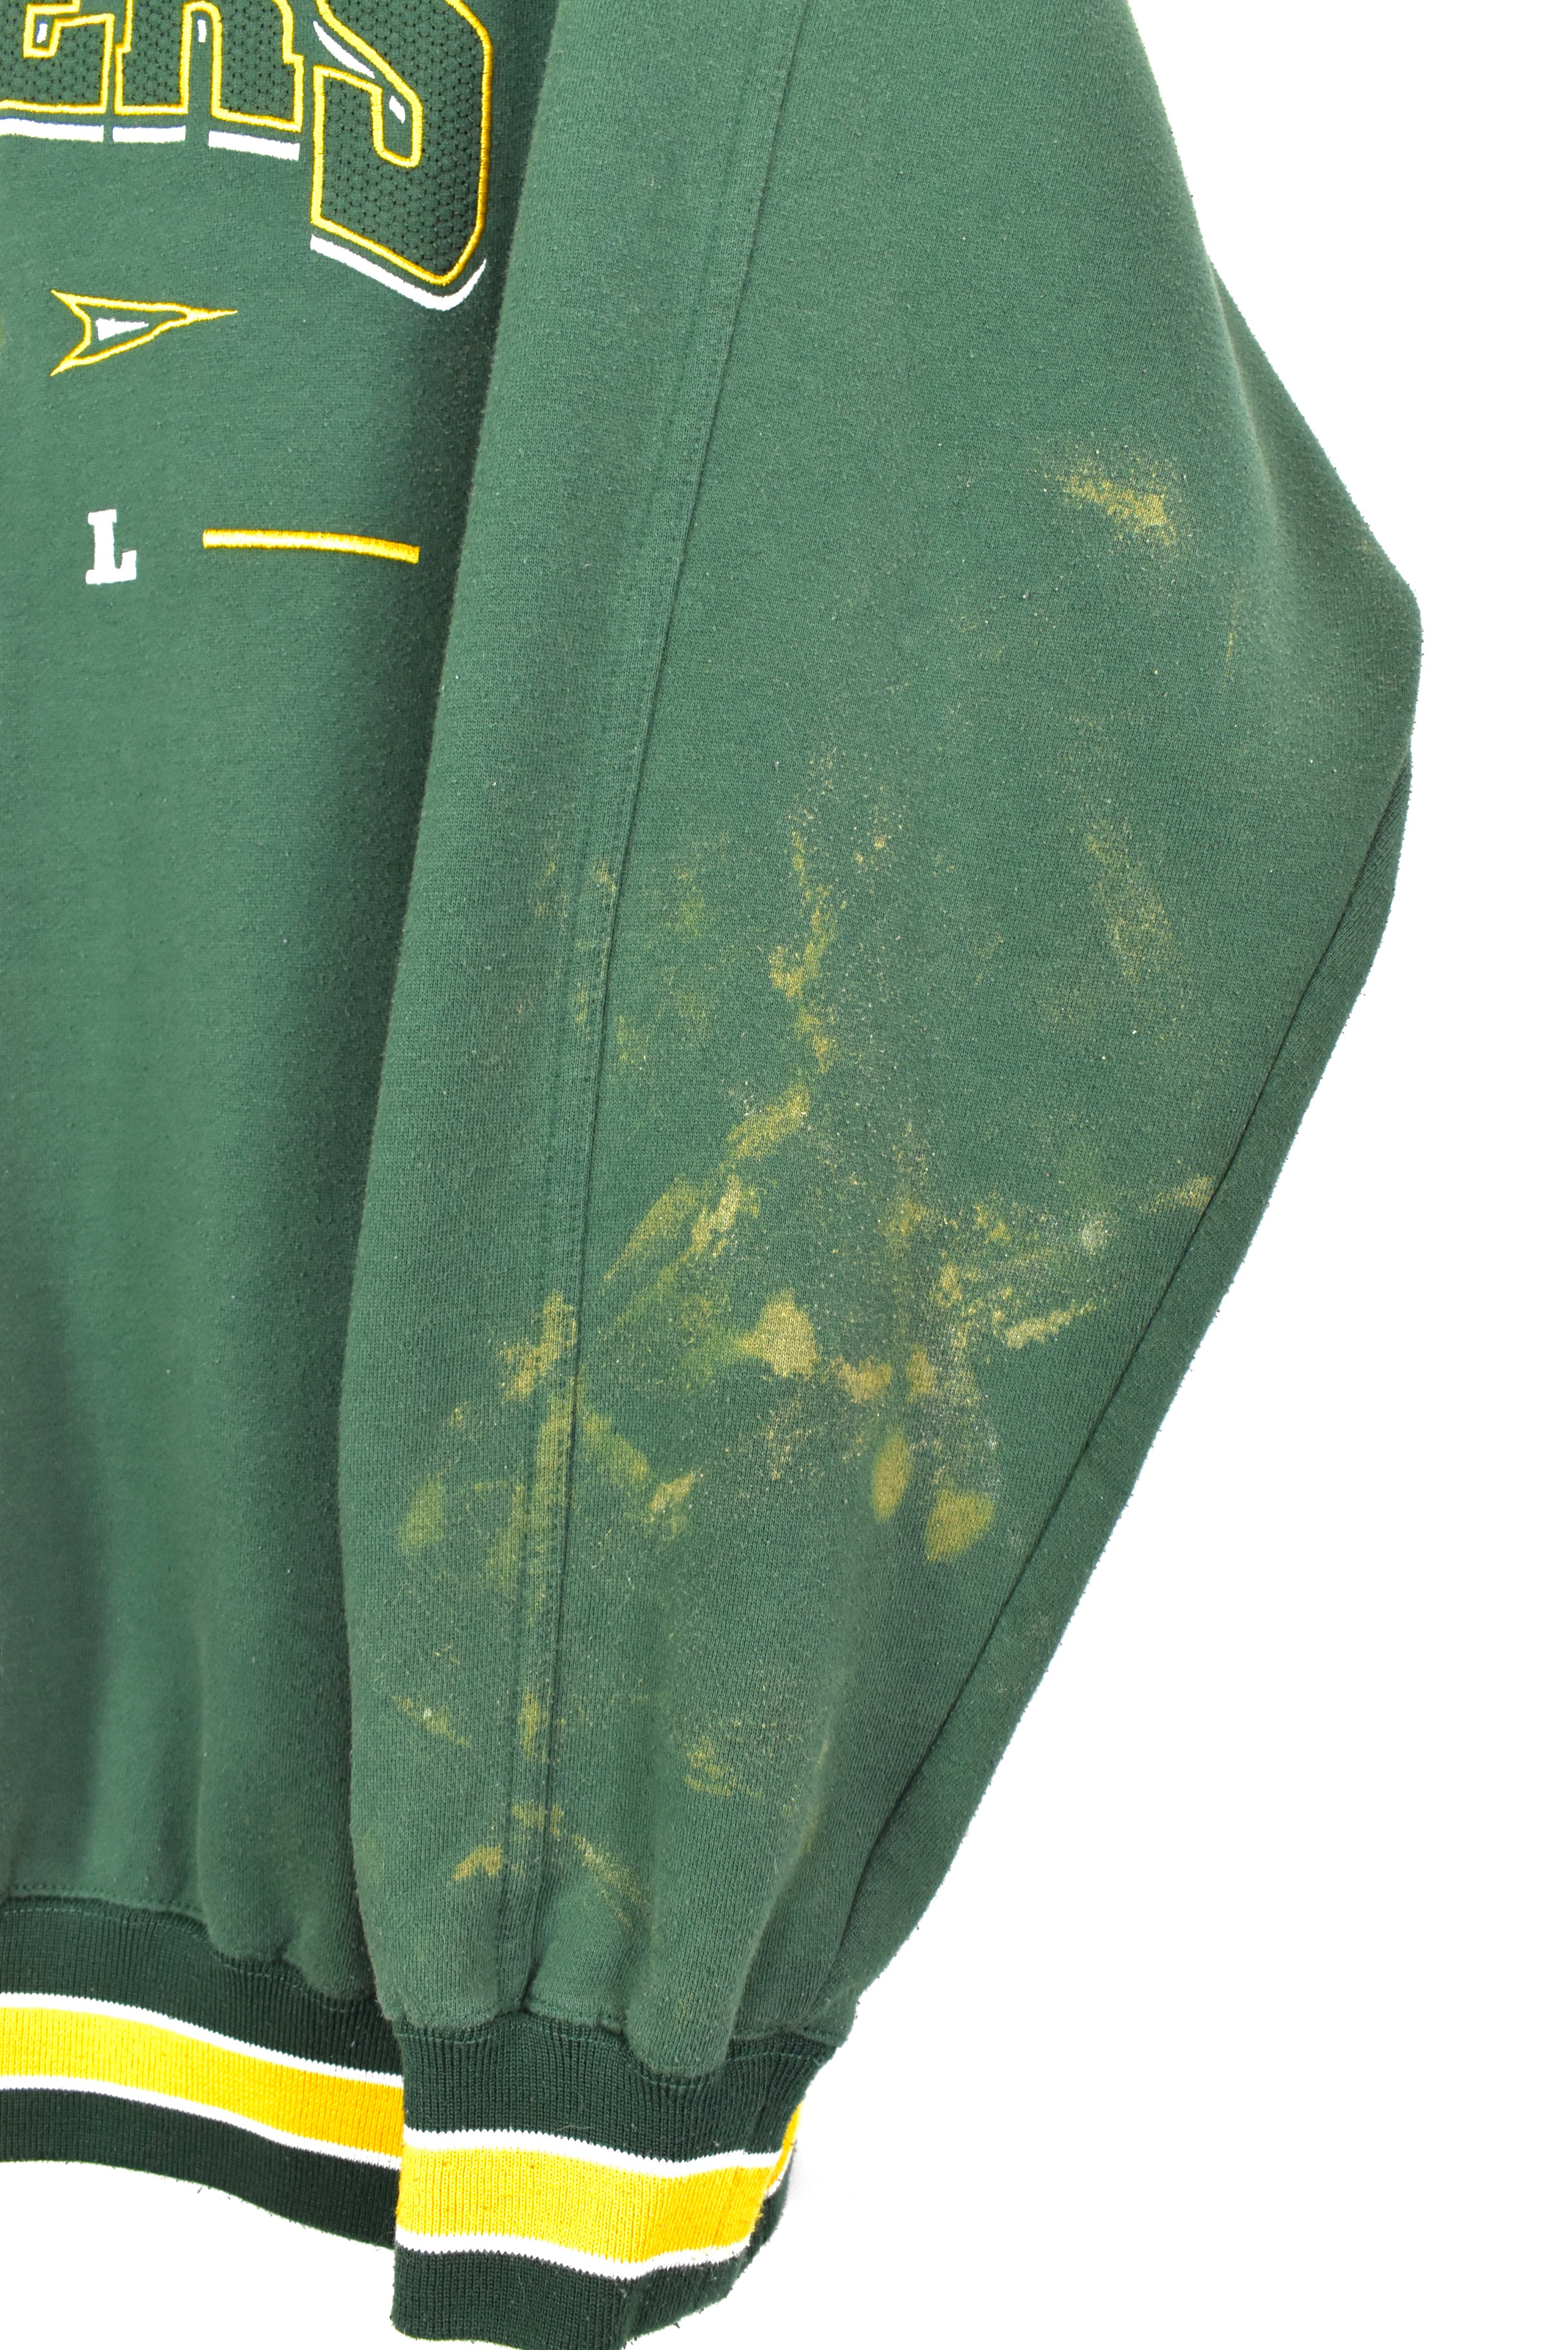 VINTAGE NFL GREEN BAY PACKERS EMBROIDERED GREEN SWEATSHIRT | XXL PRO SPORT